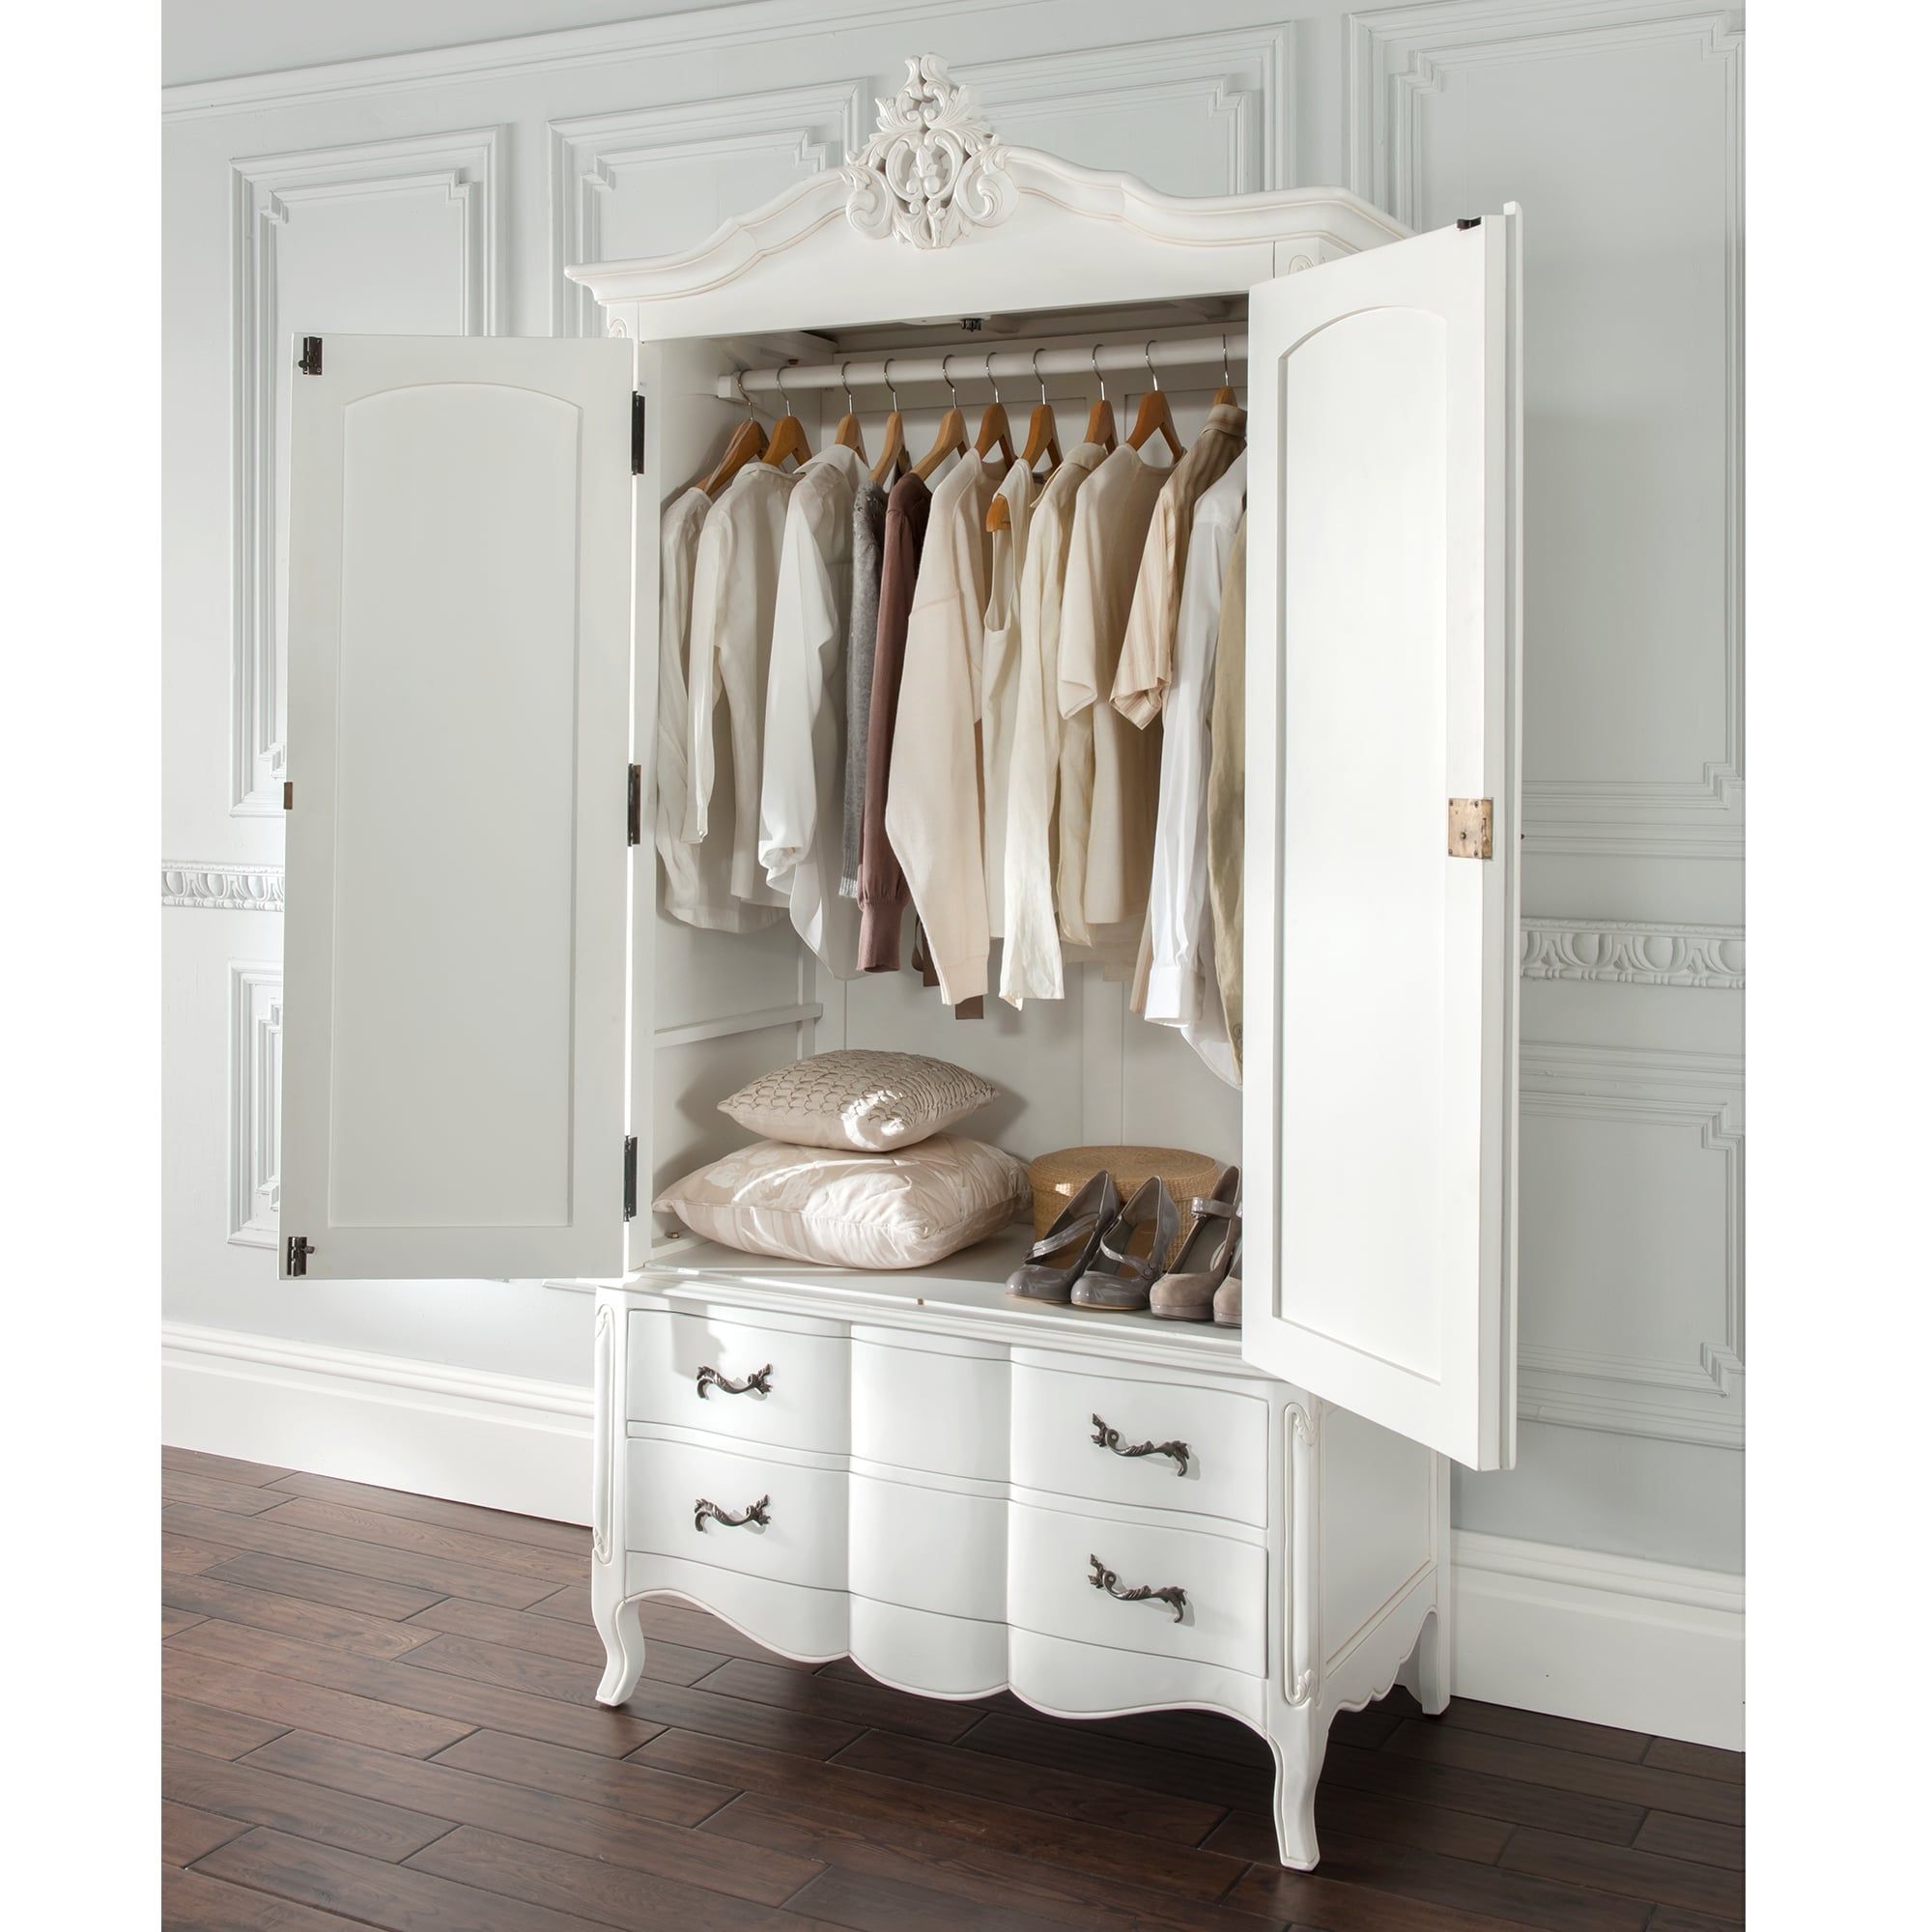 Estelle Antique French Style Wardrobe | Shabby Chic With Vintage Shabby Chic Wardrobes (View 2 of 15)